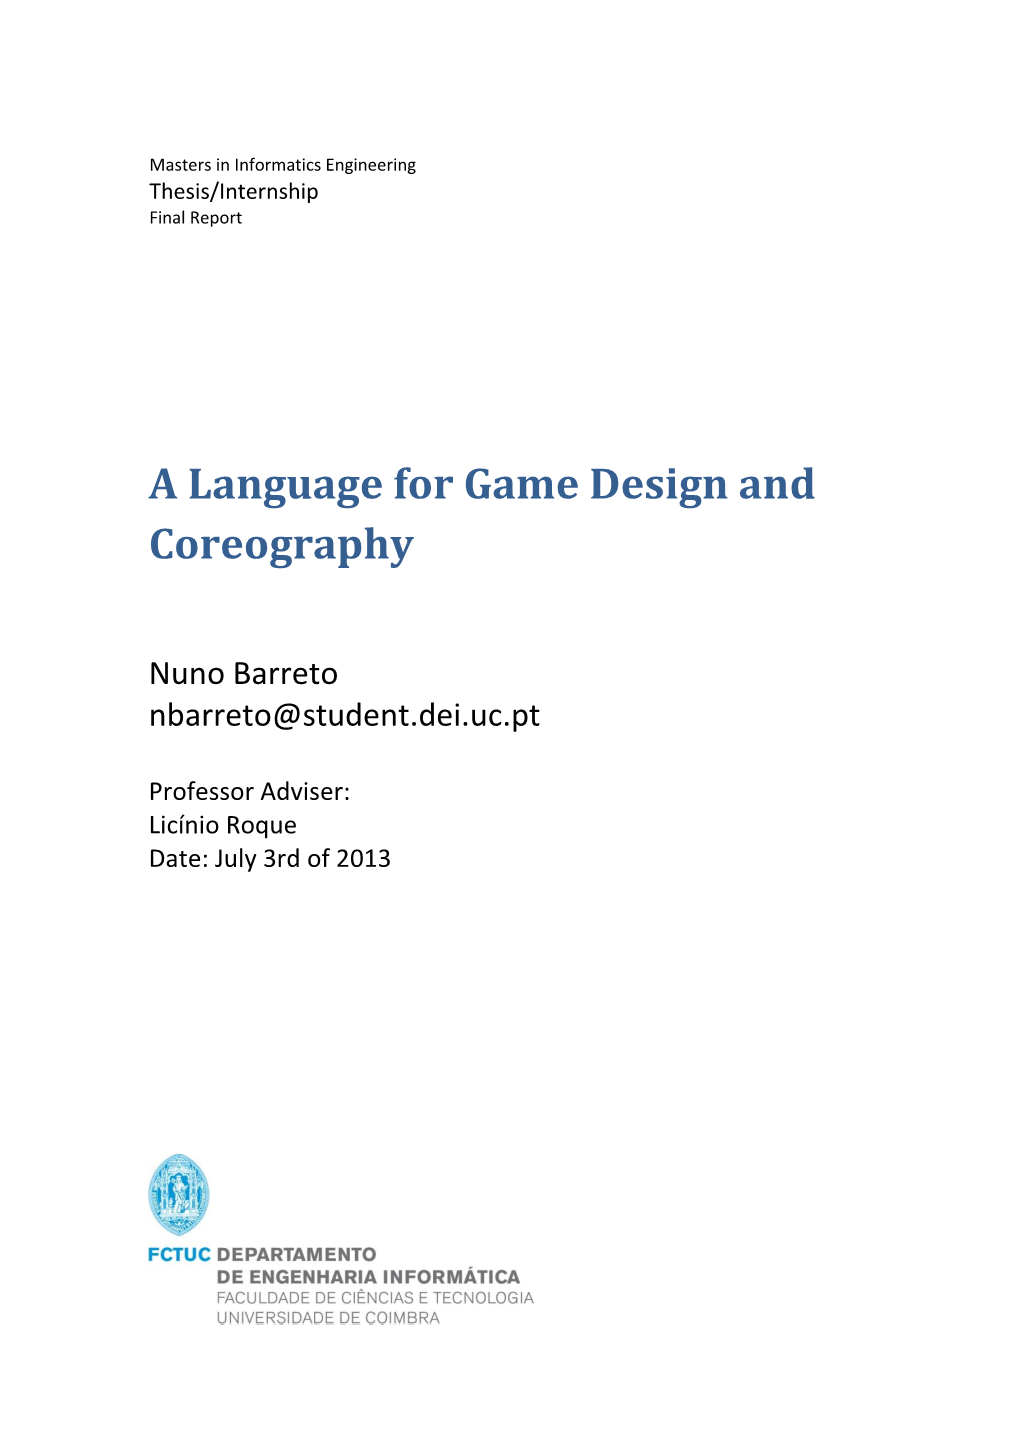 A Language for Game Design and Coreography